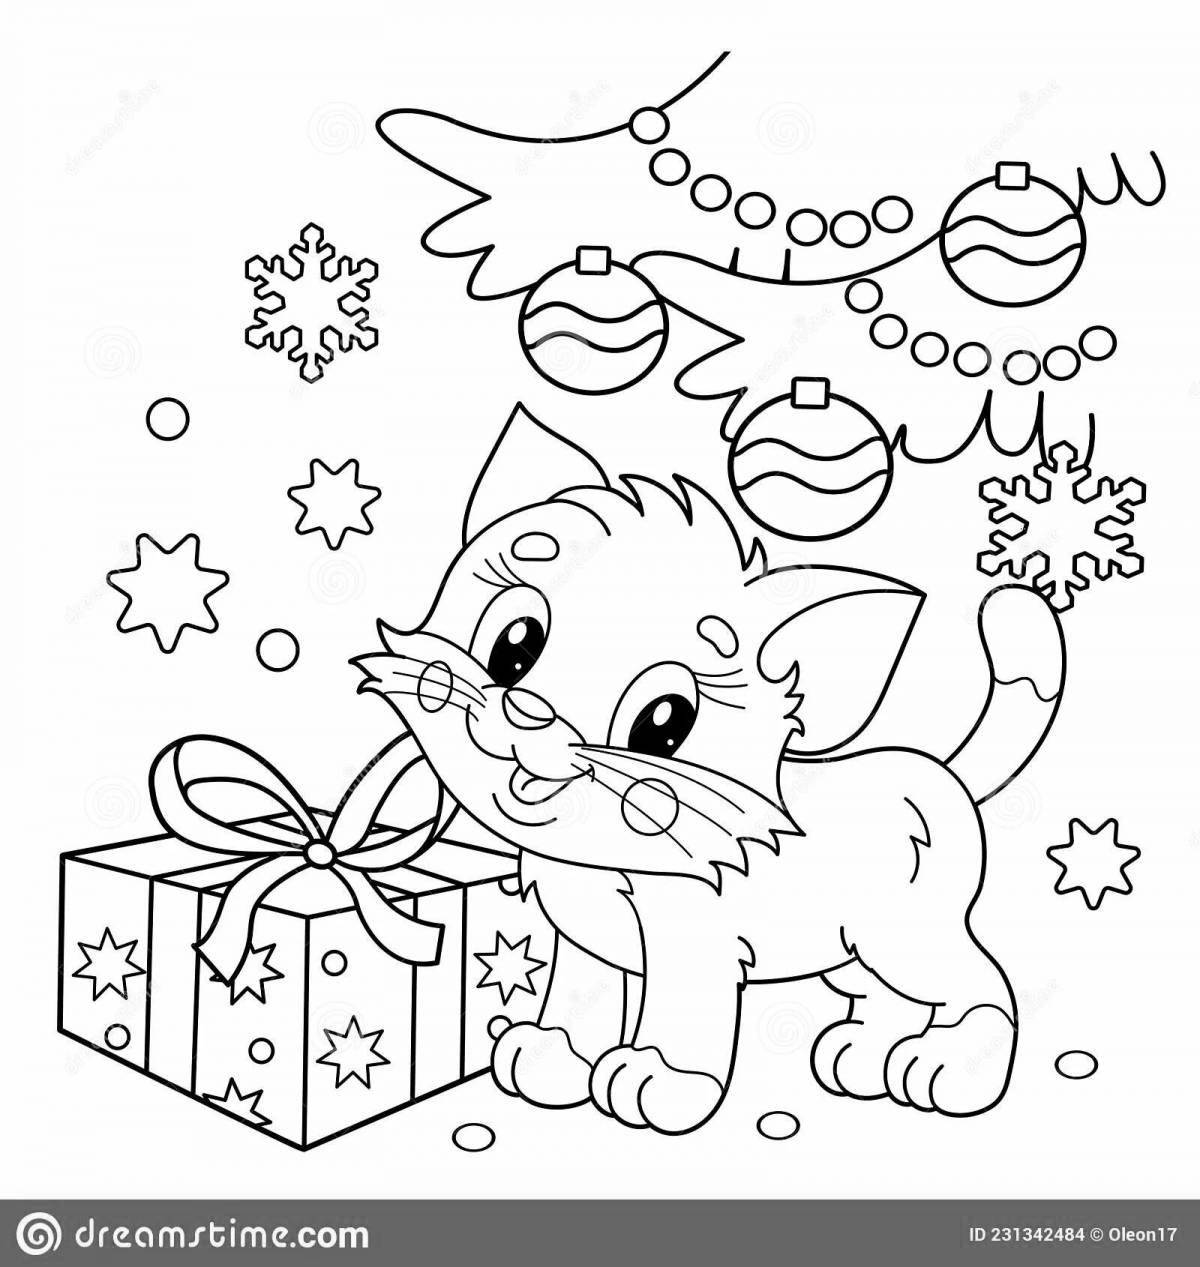 Christmas kittens coloring page